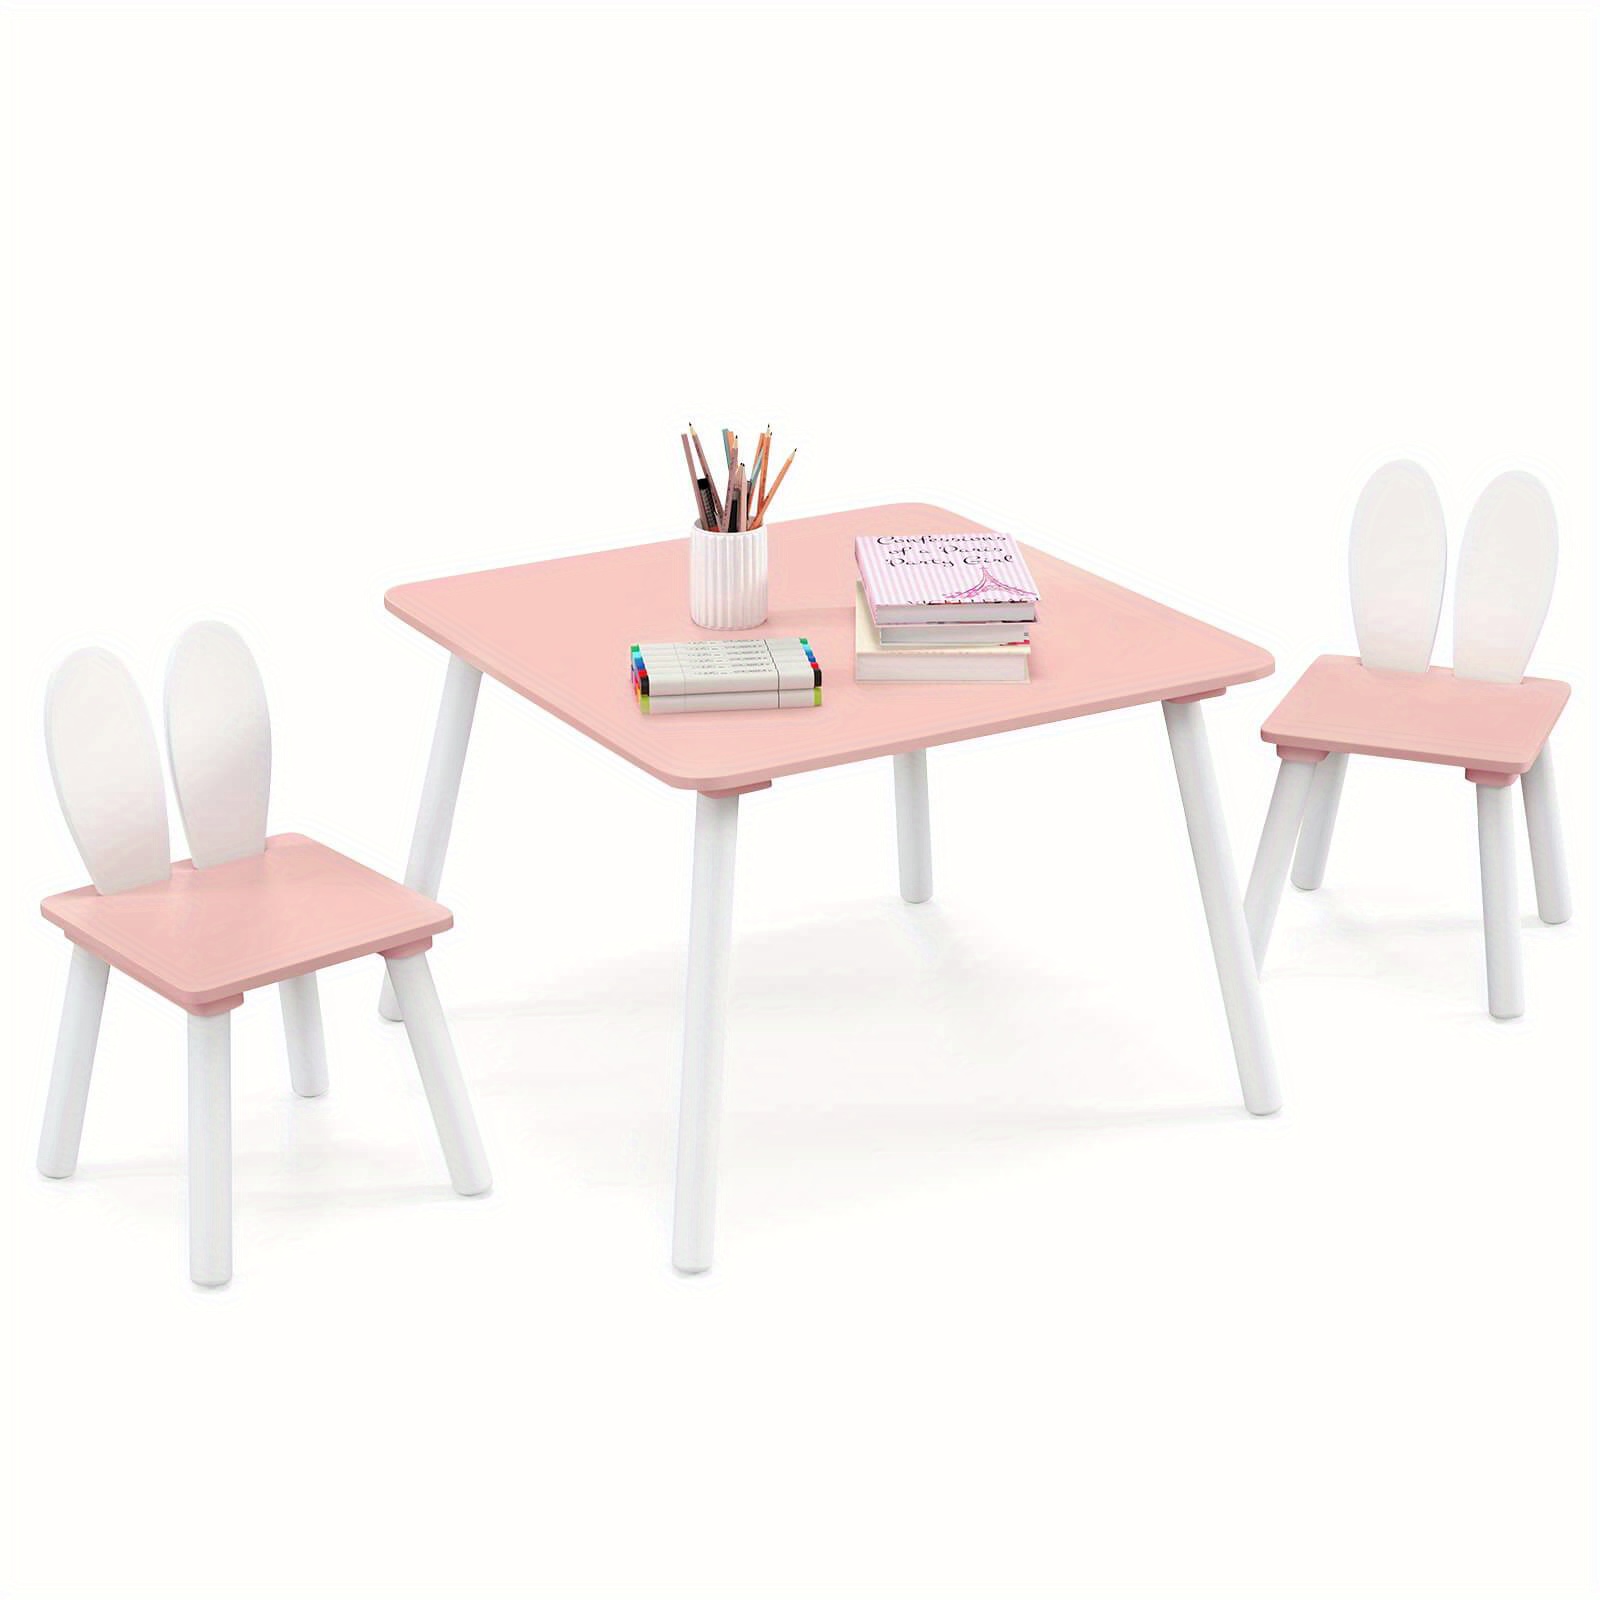 

Lifezeal 3 Pieces Kids Table & Chairs Set Children Wooden Furniture Set W/solid Wood Legs